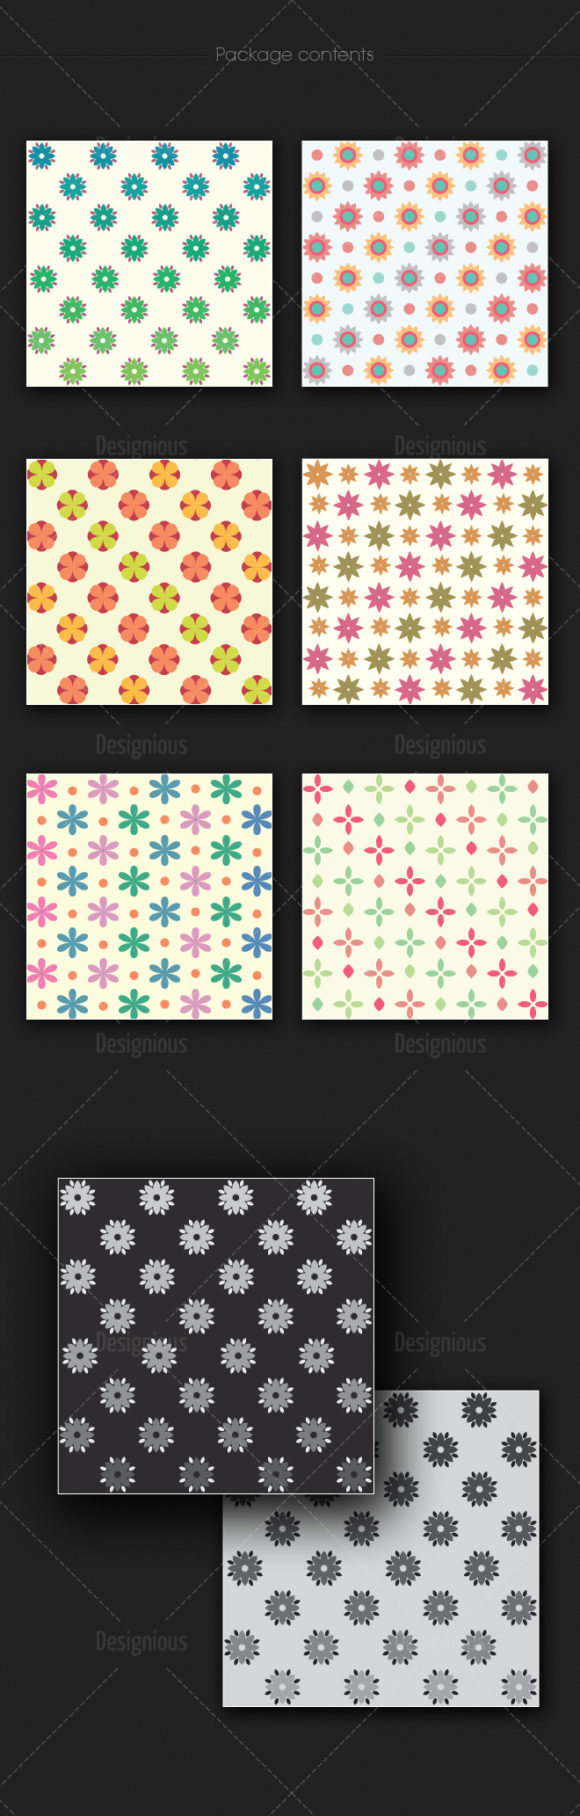 Seamless Patterns Vector Pack 175 2